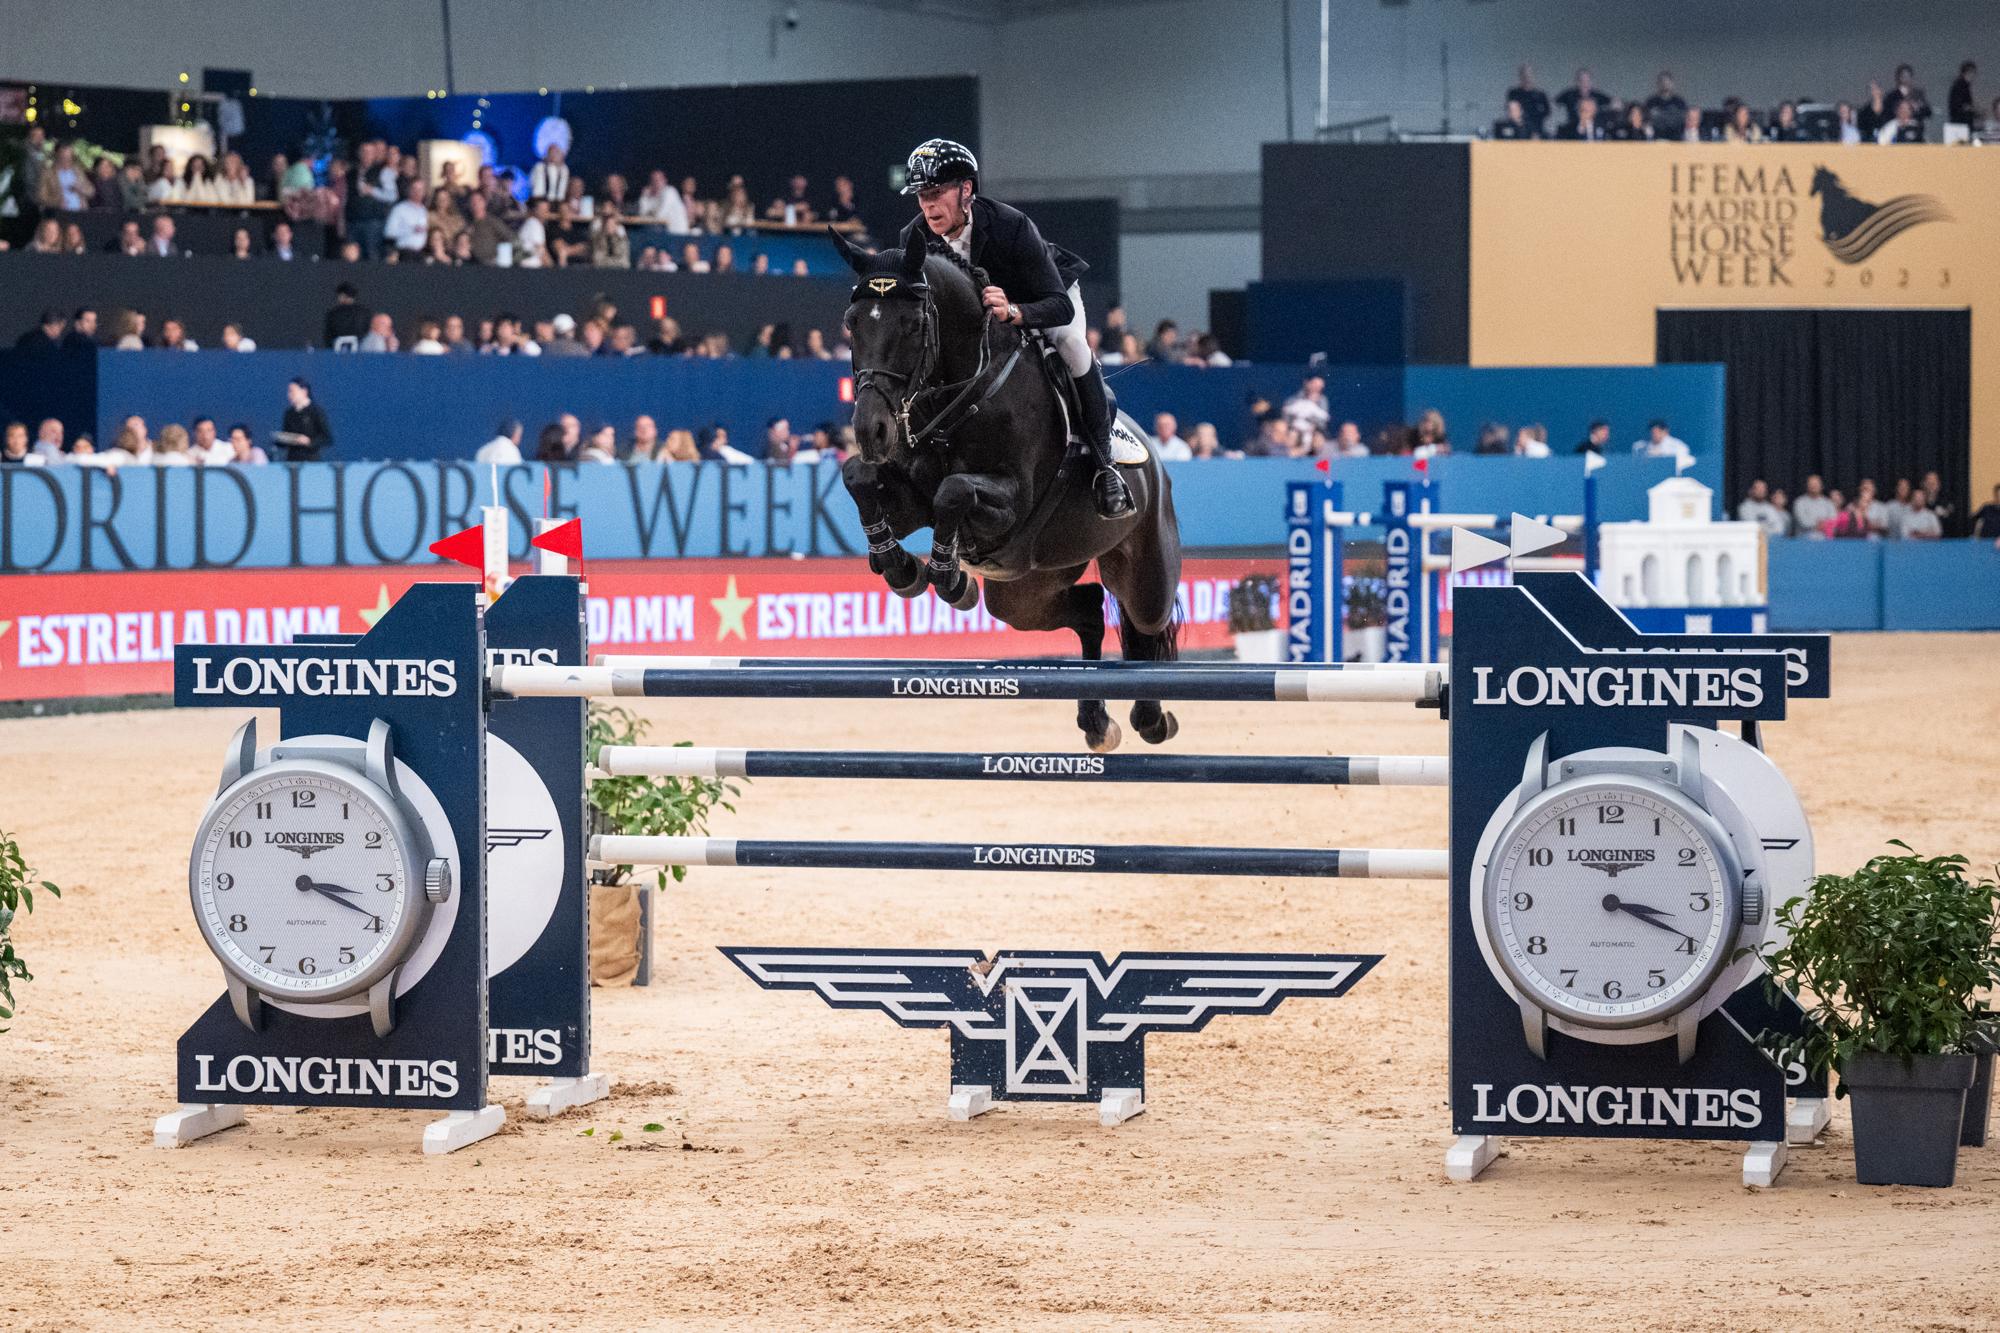 Marcus Ehning and Coolio 42 edge Maher in Madrid Thriller!